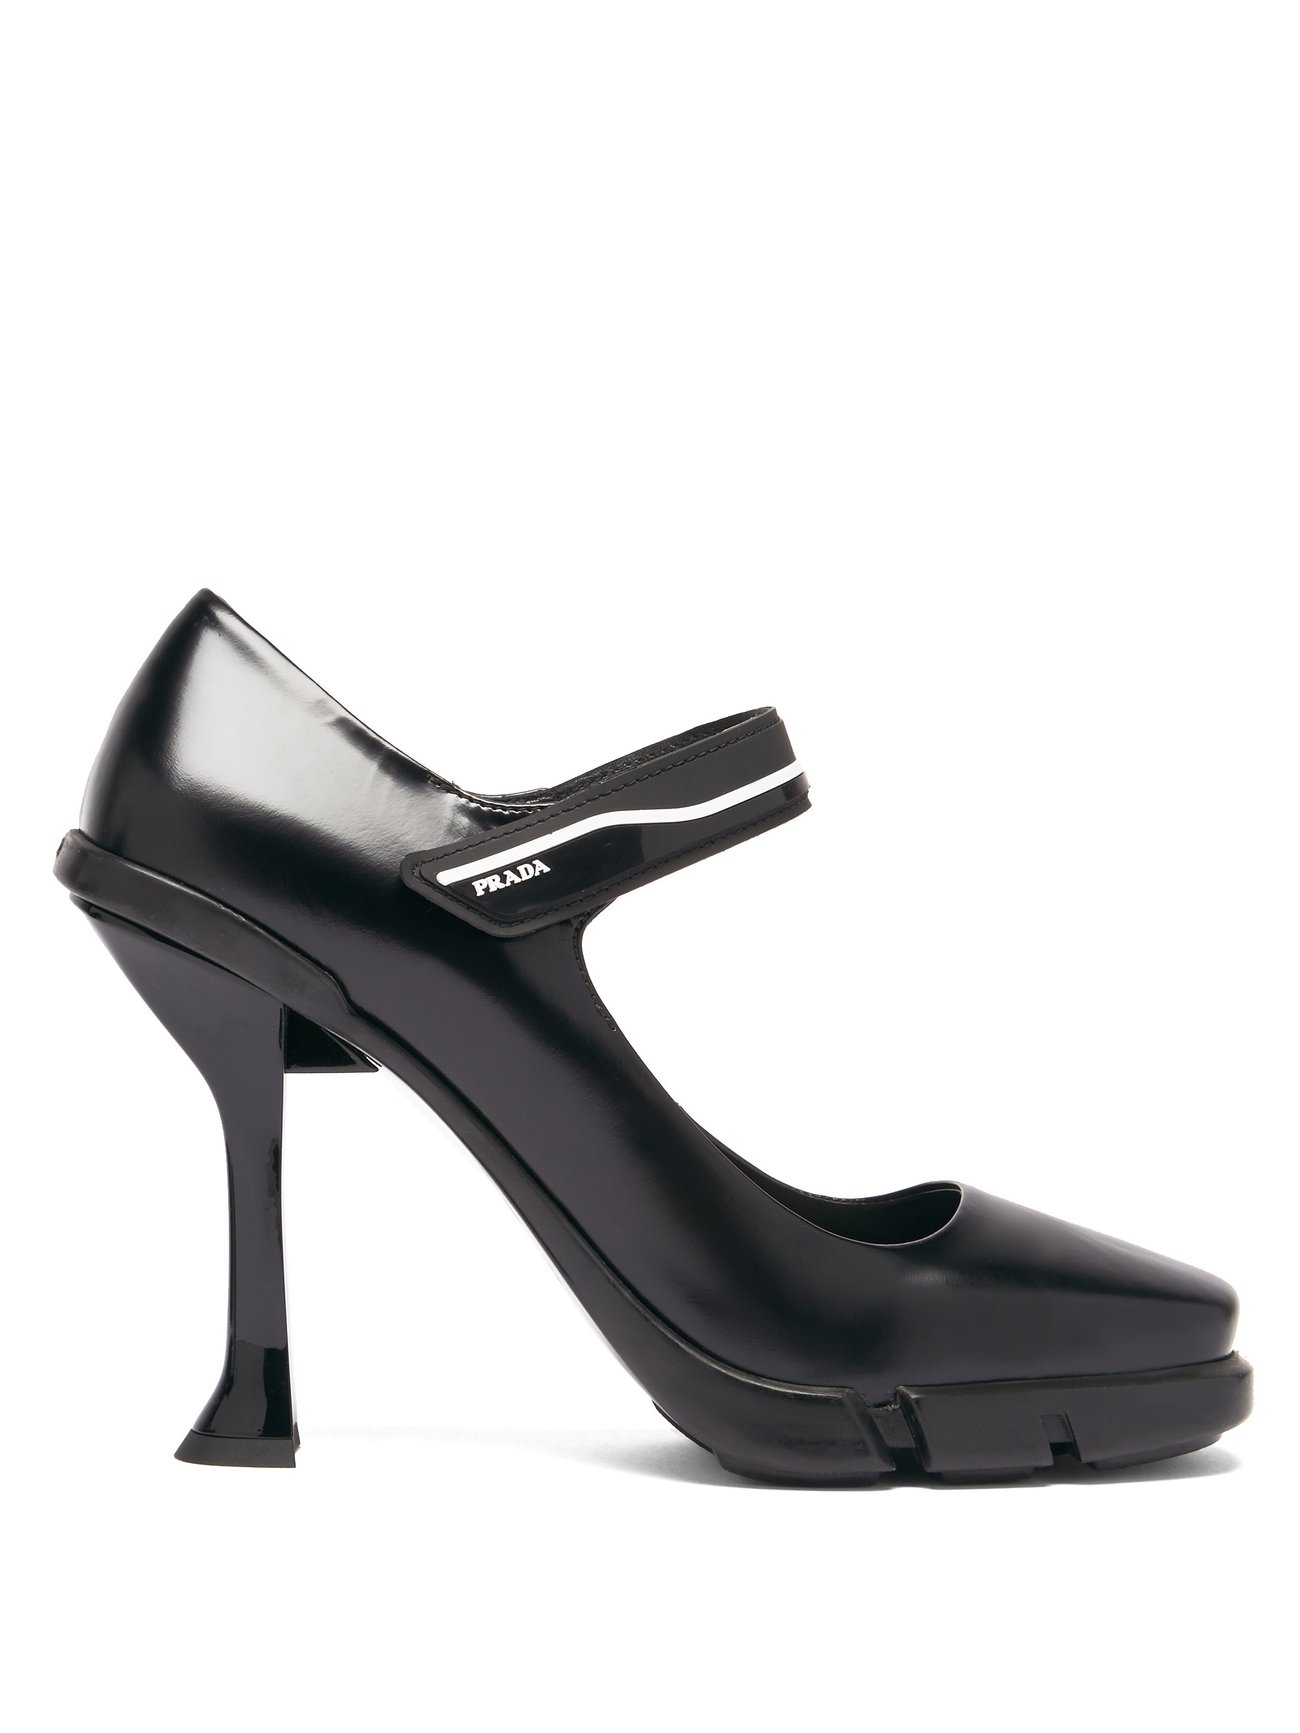 Black Rubber-sole leather Mary Jane pumps | Prada | MATCHES UK